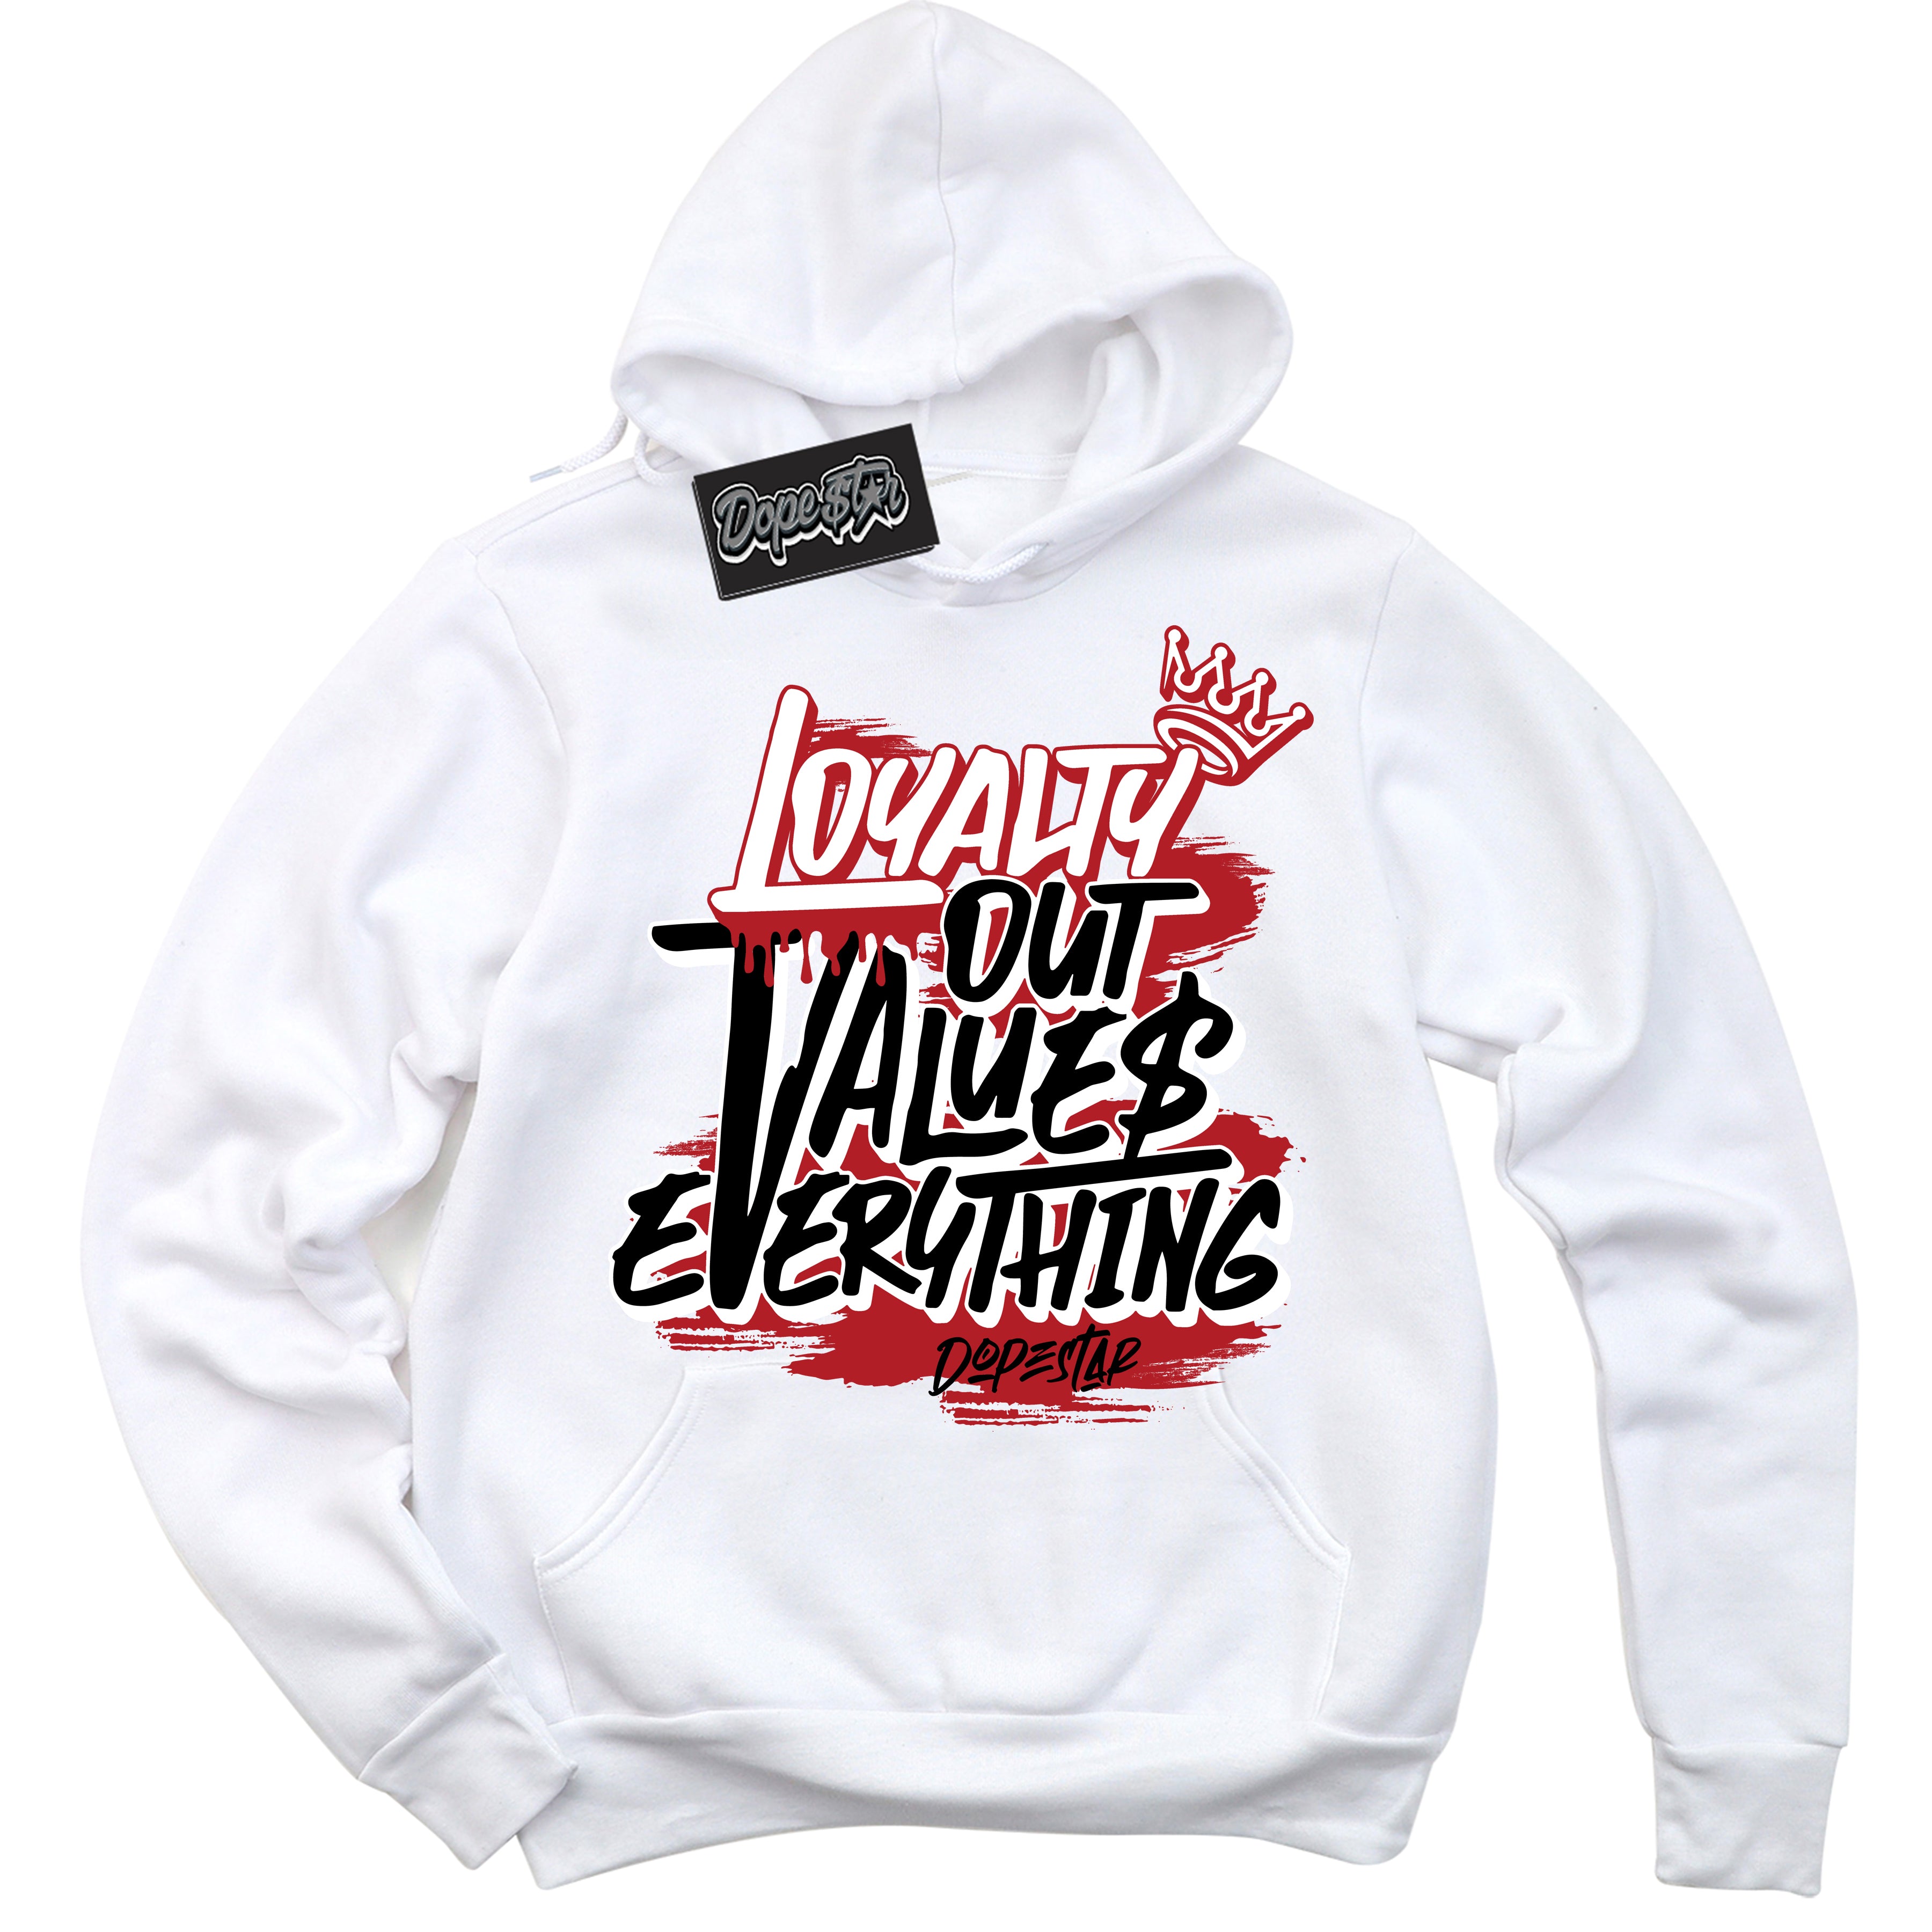 Cool White Hoodie with “ Loyalty Out Values Everything ”  design that Perfectly Matches Red Swoosh Panda  Sneakers.